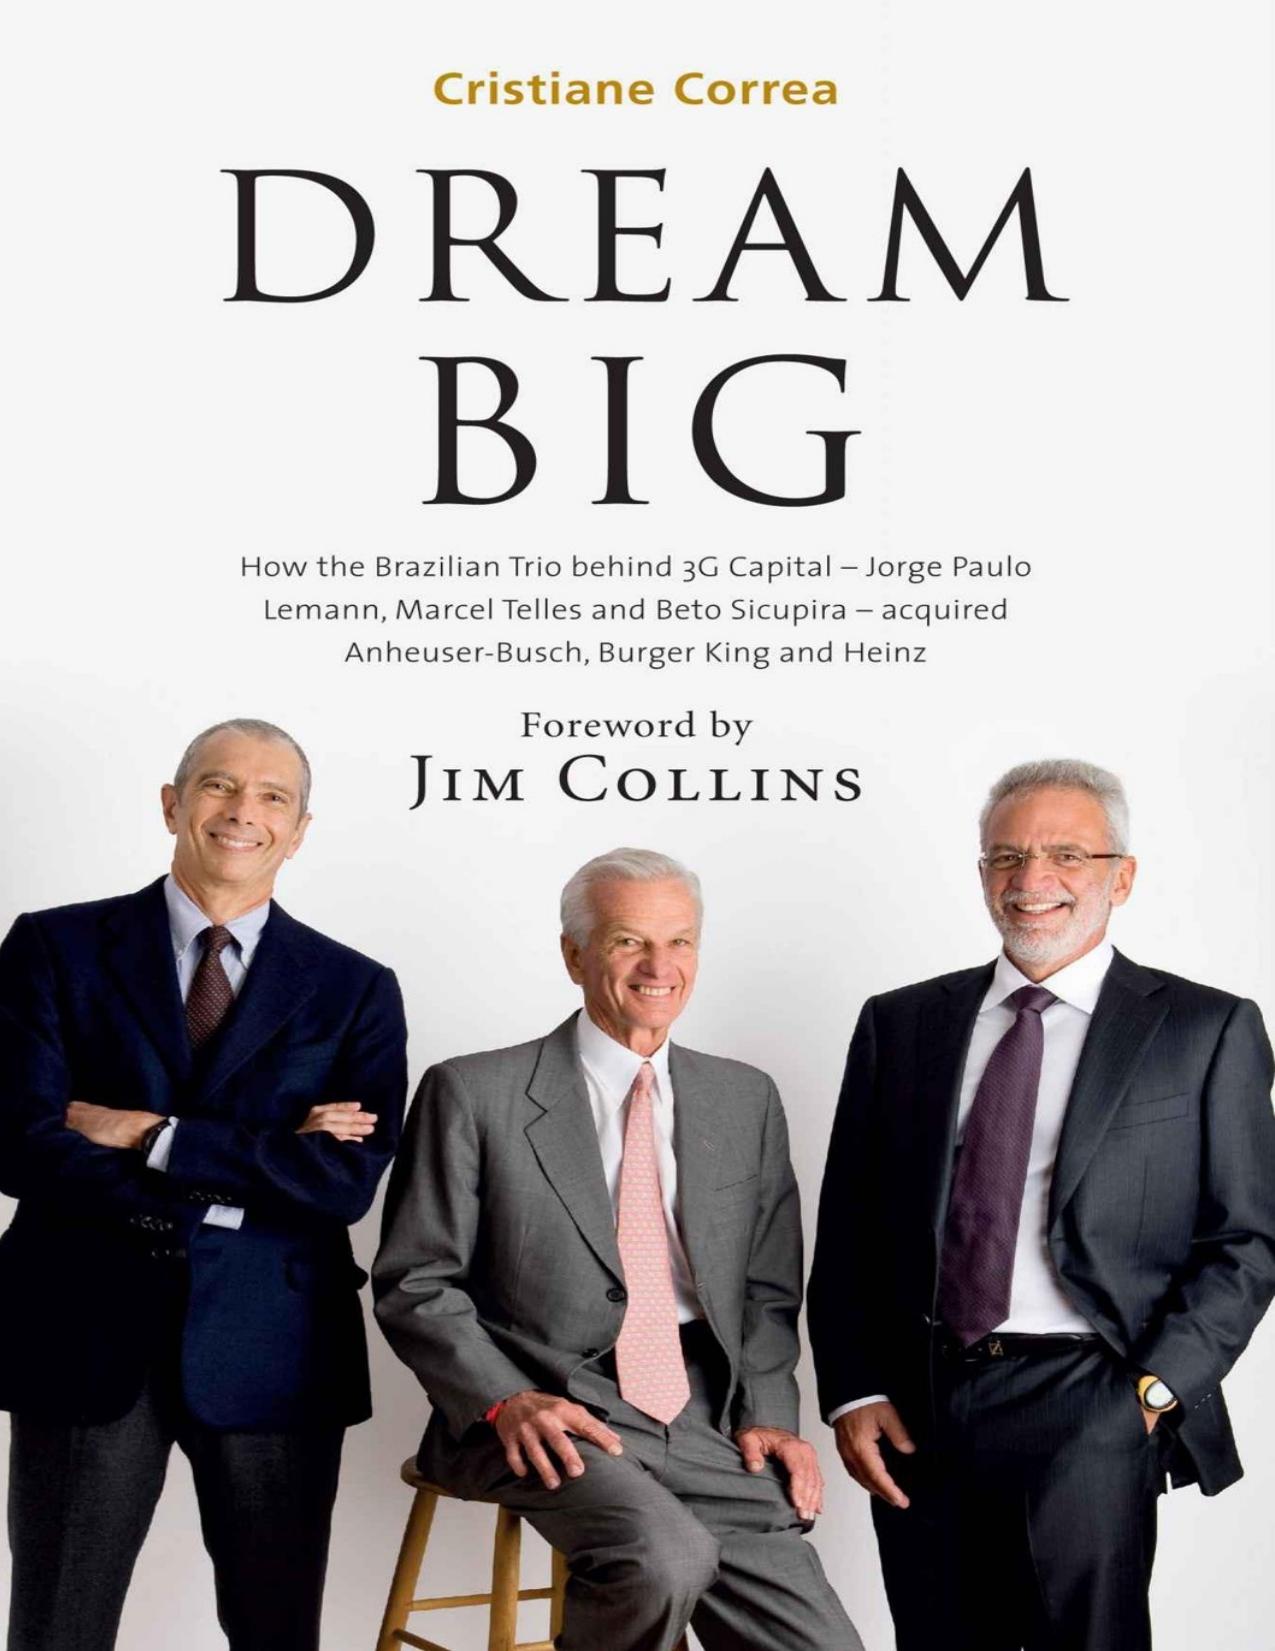 DREAM BIG_ How the Brazilian Trio behind 3G Capital - Jorge Paulo Lemann, Marcel Telles and Beto Sicupira - acquired Anheuser-Busch, Burger King and Heinz.jpg